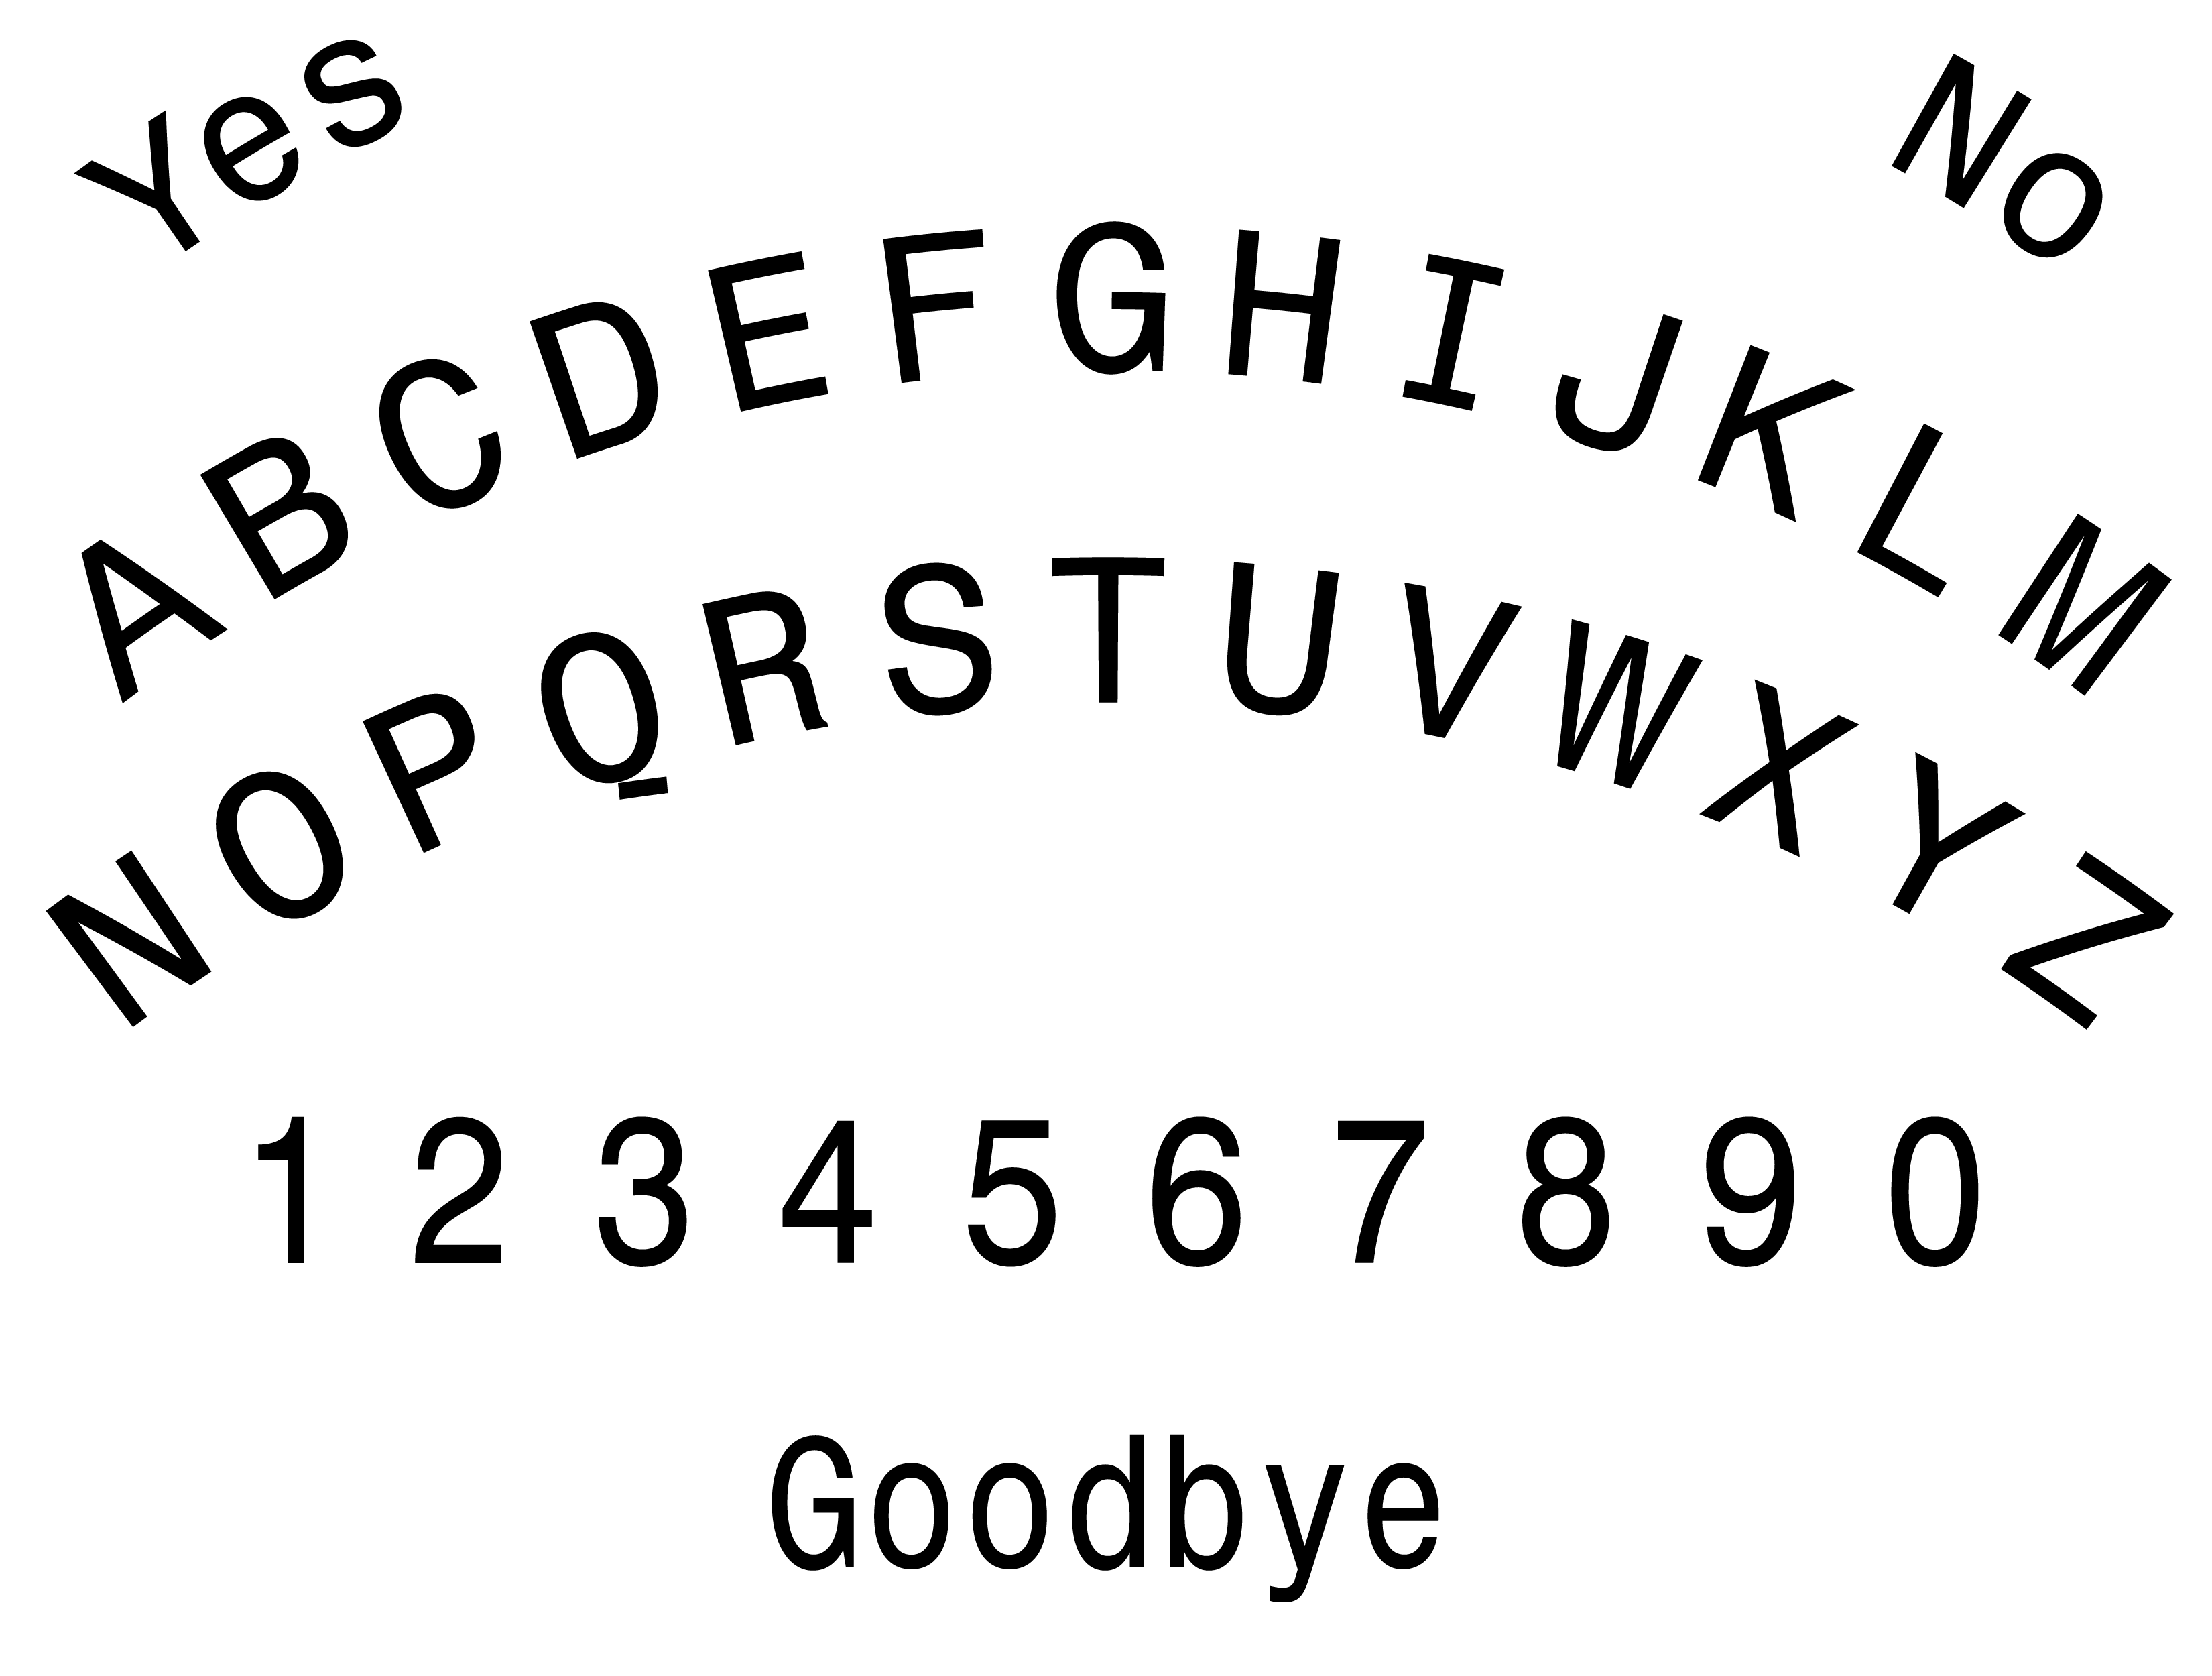 Free Ouija Board Images, Download Free Ouija Board Images png images